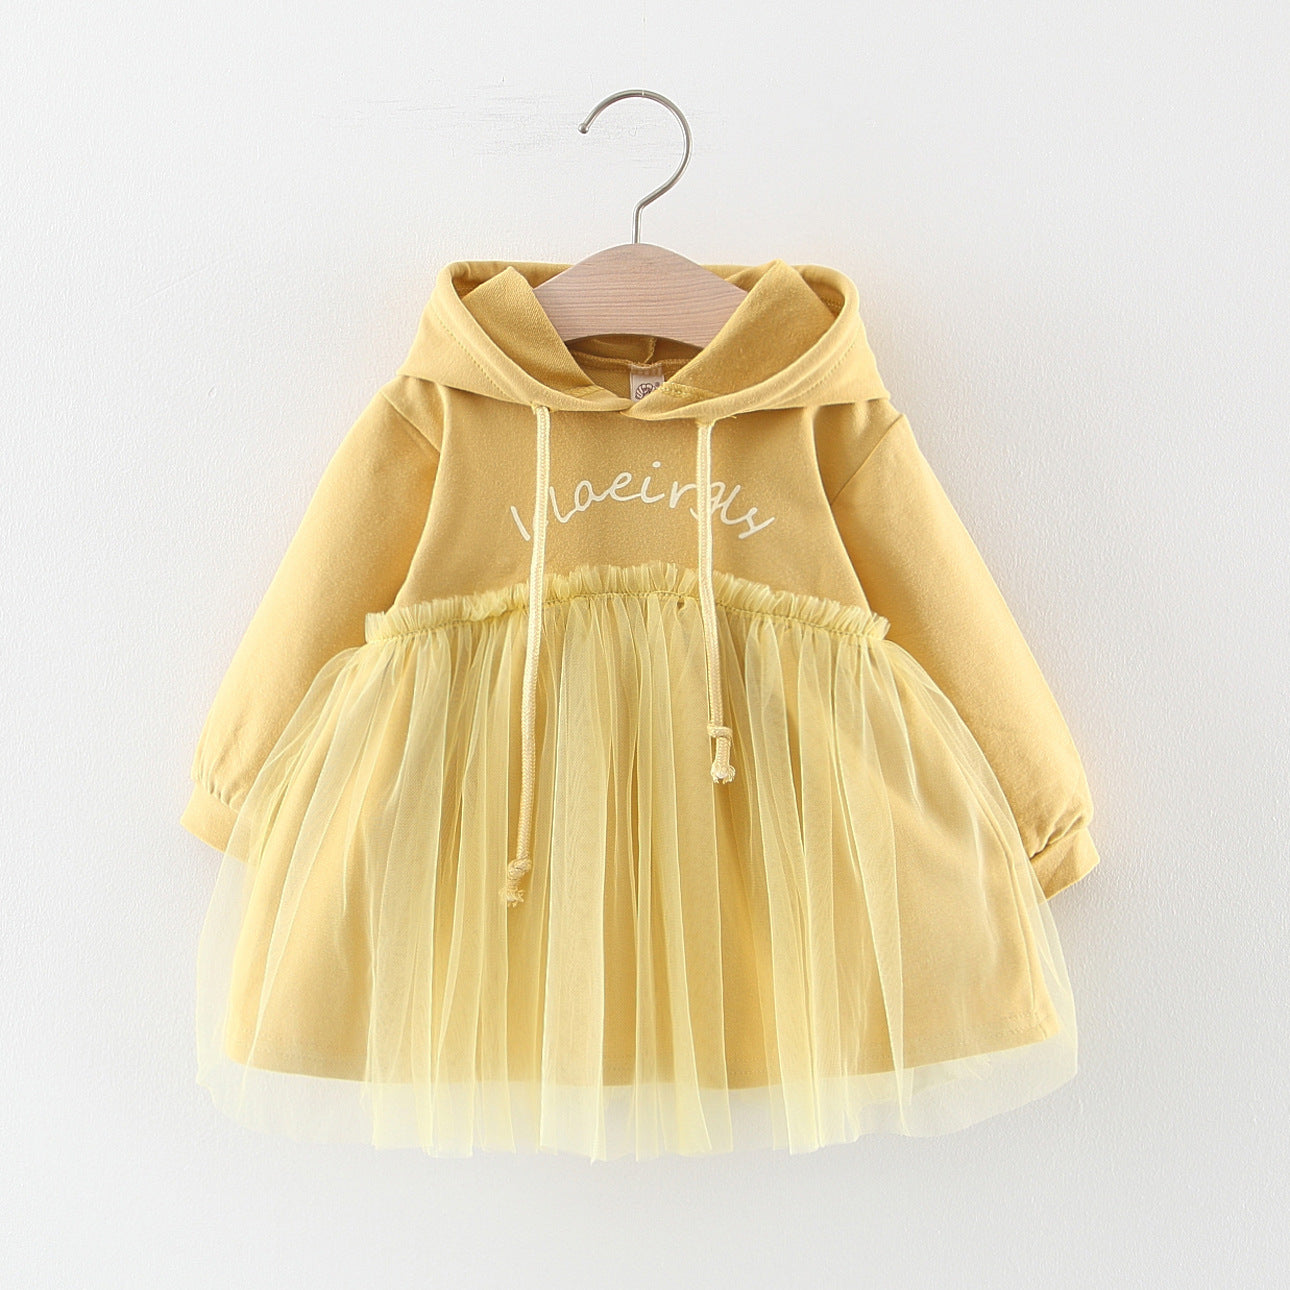 Adorable and Cute Baby Girl Dress